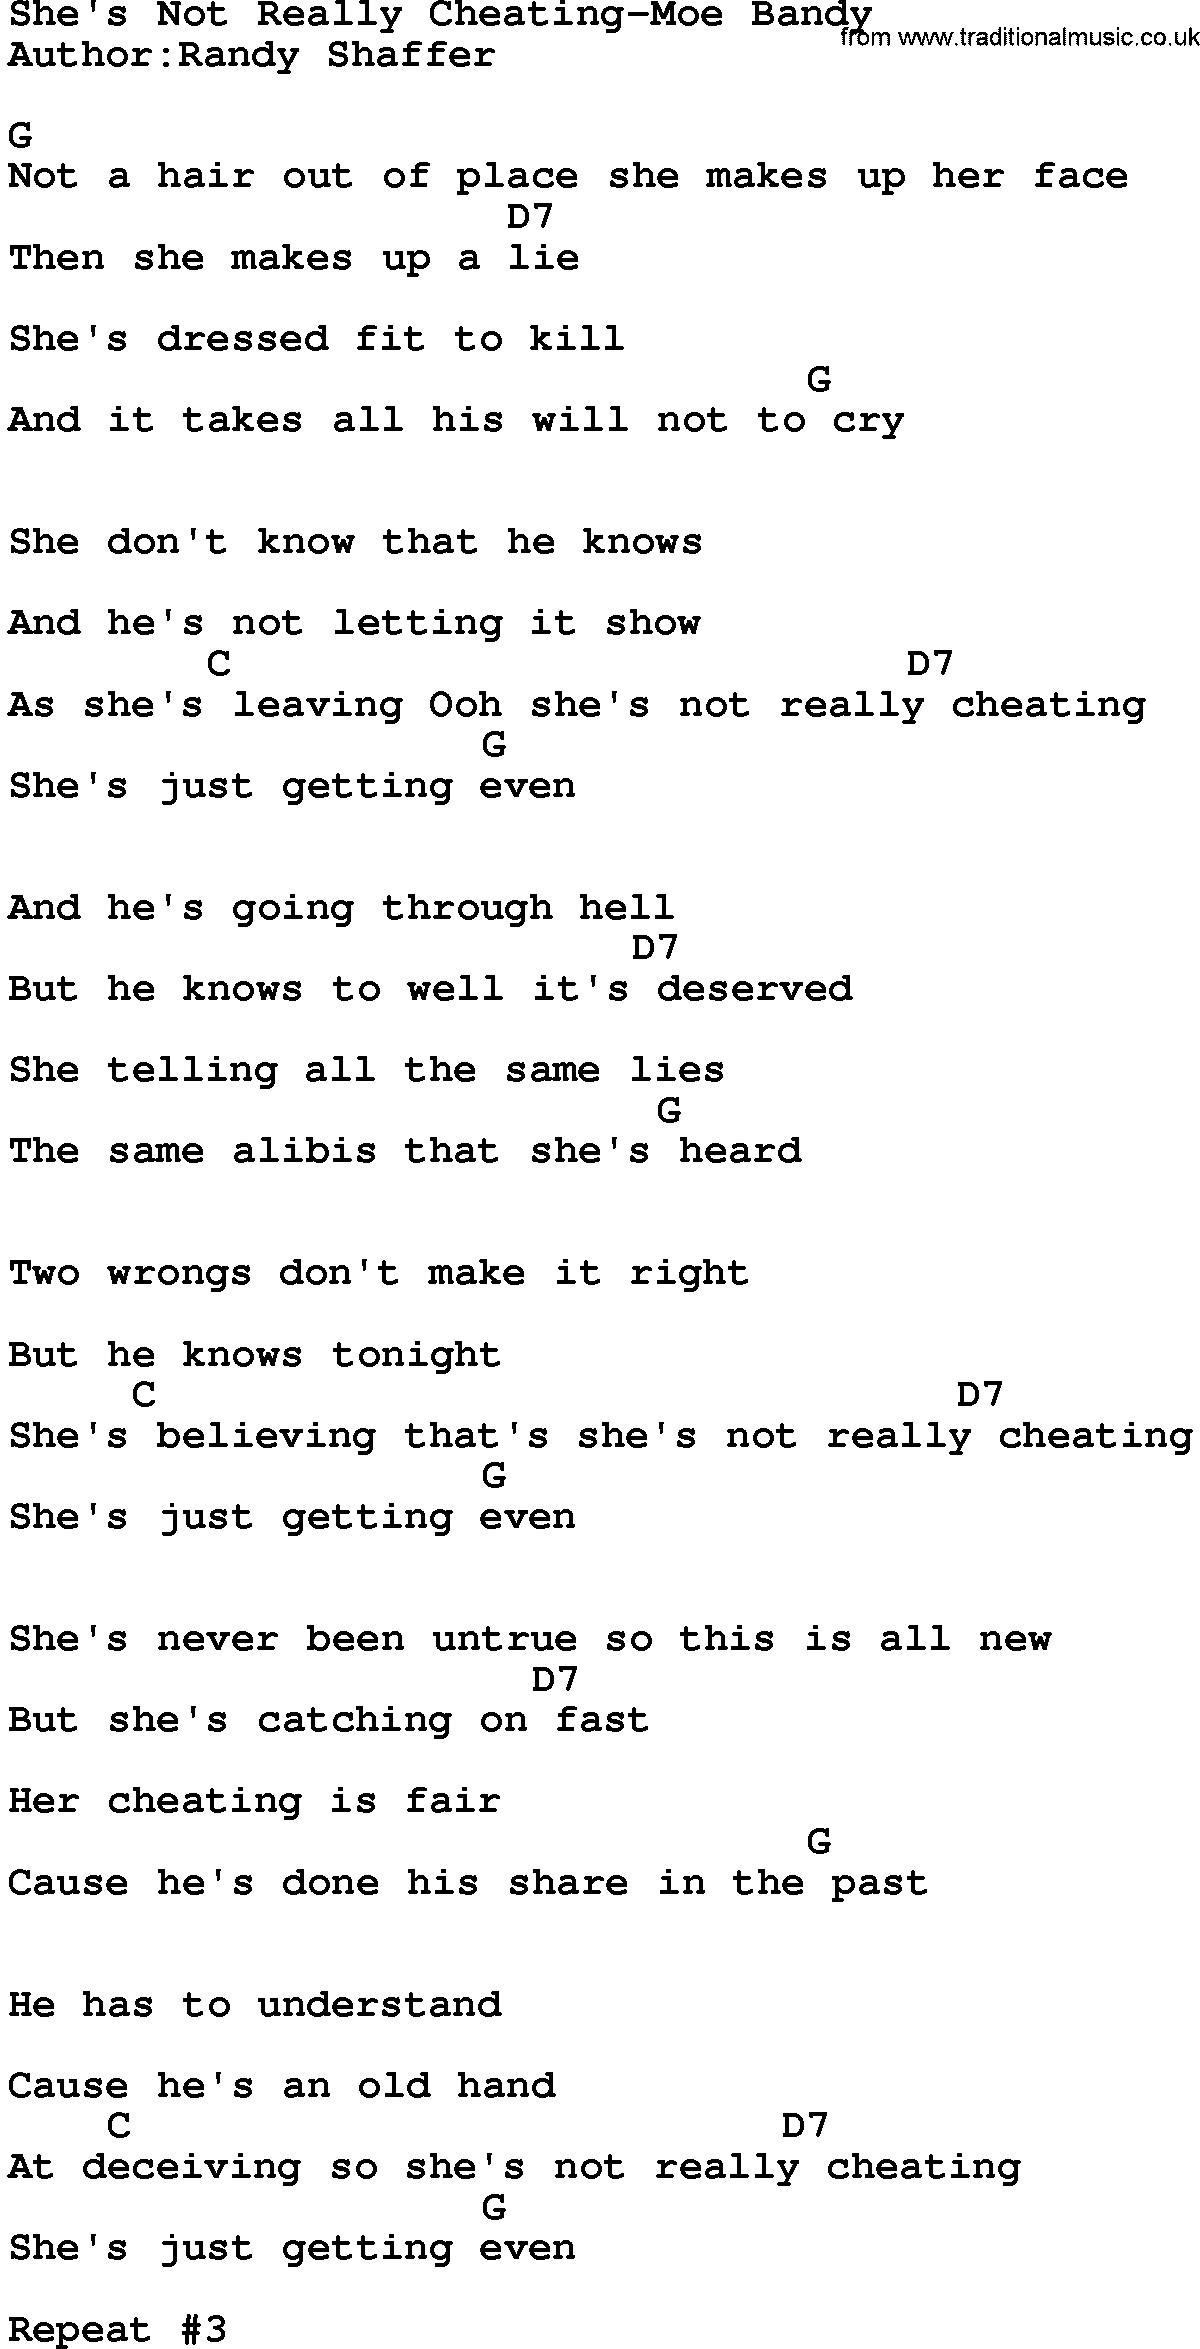 Country music song: She's Not Really Cheating-Moe Bandy lyrics and chords